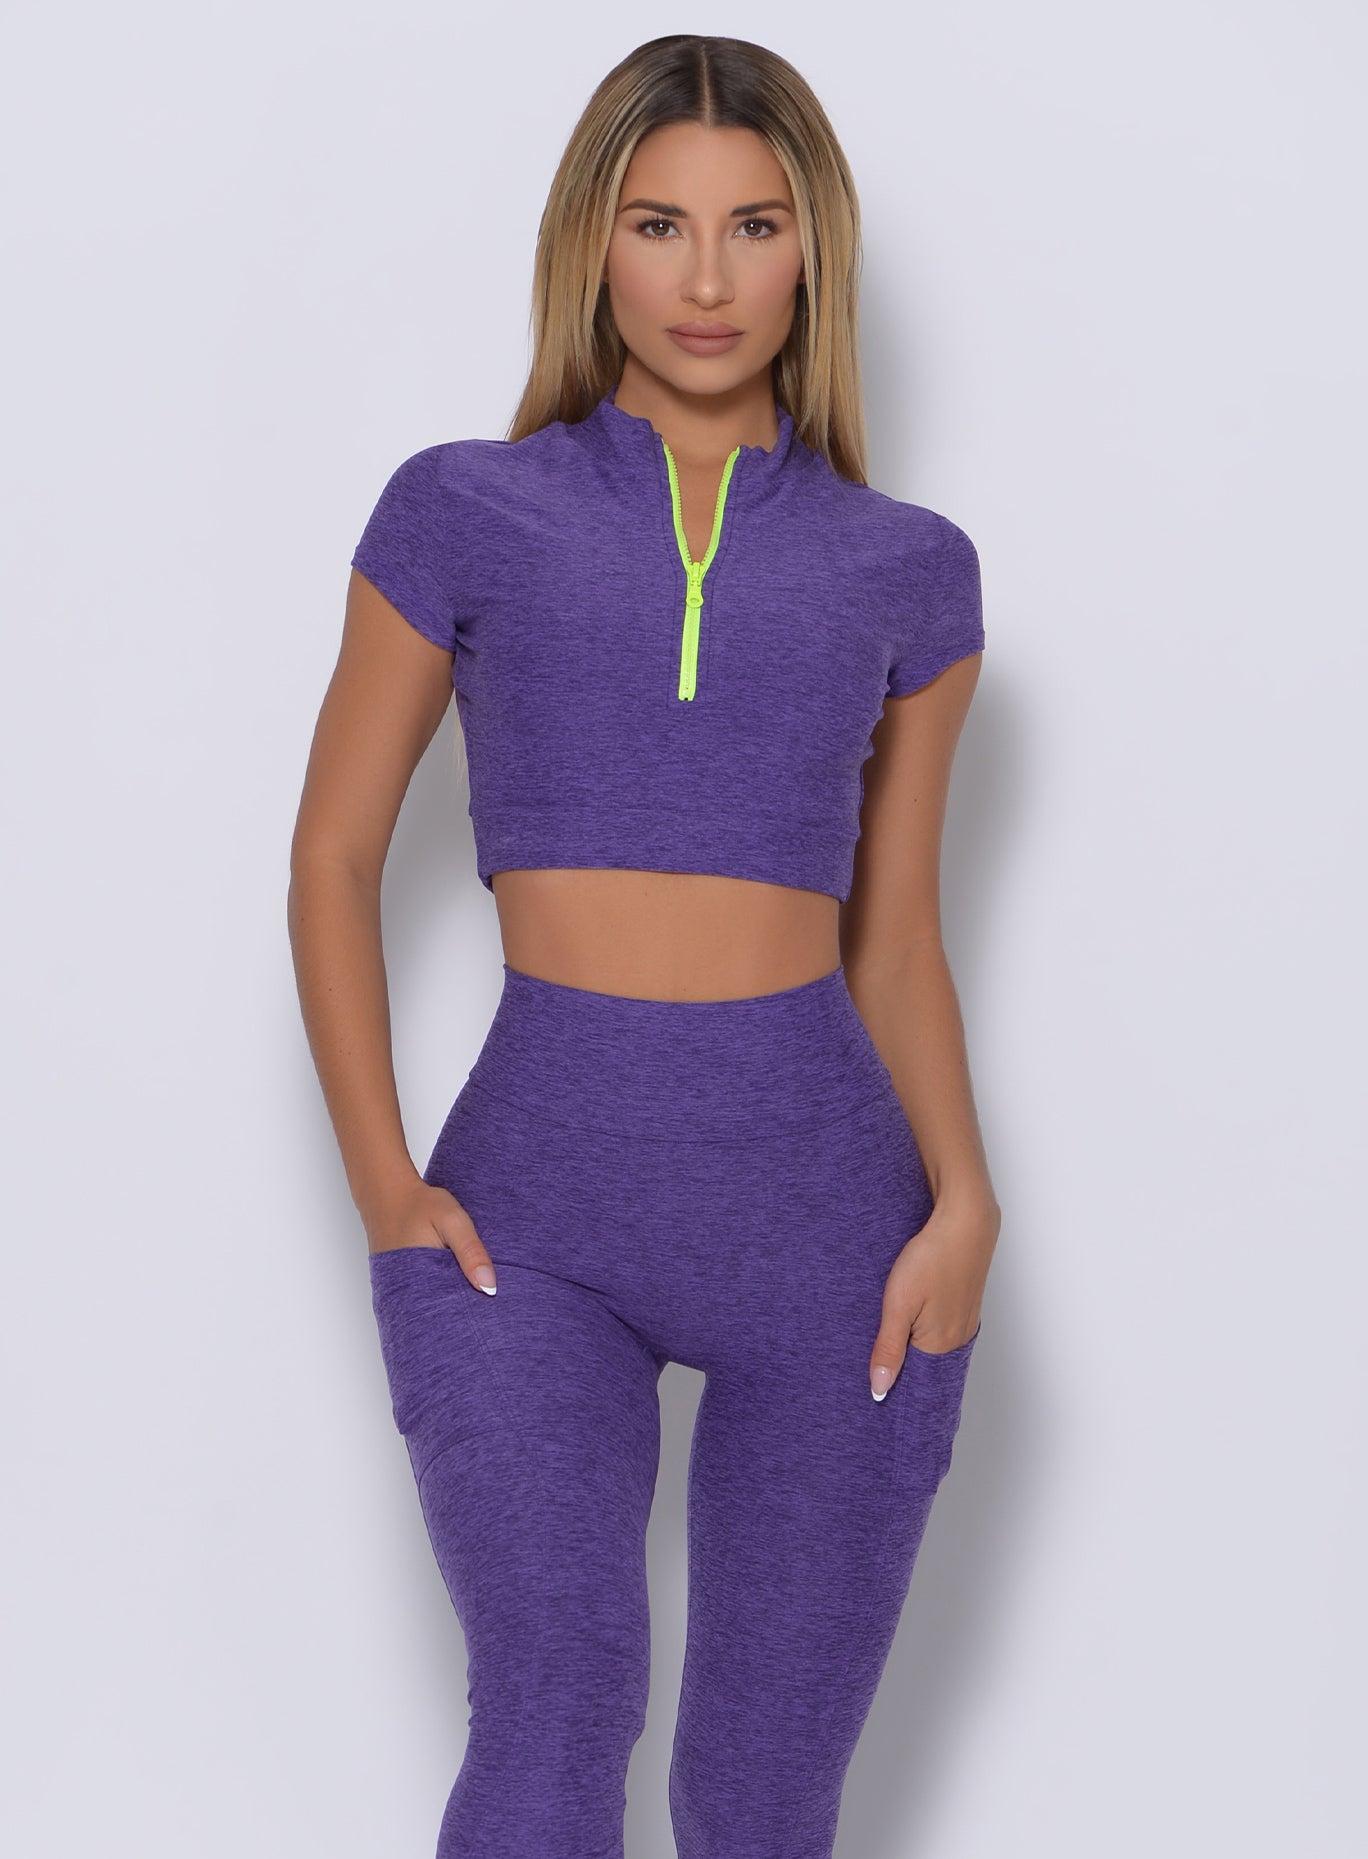 Model facing forward wearing our neon zip top in iris color and a matching leggings